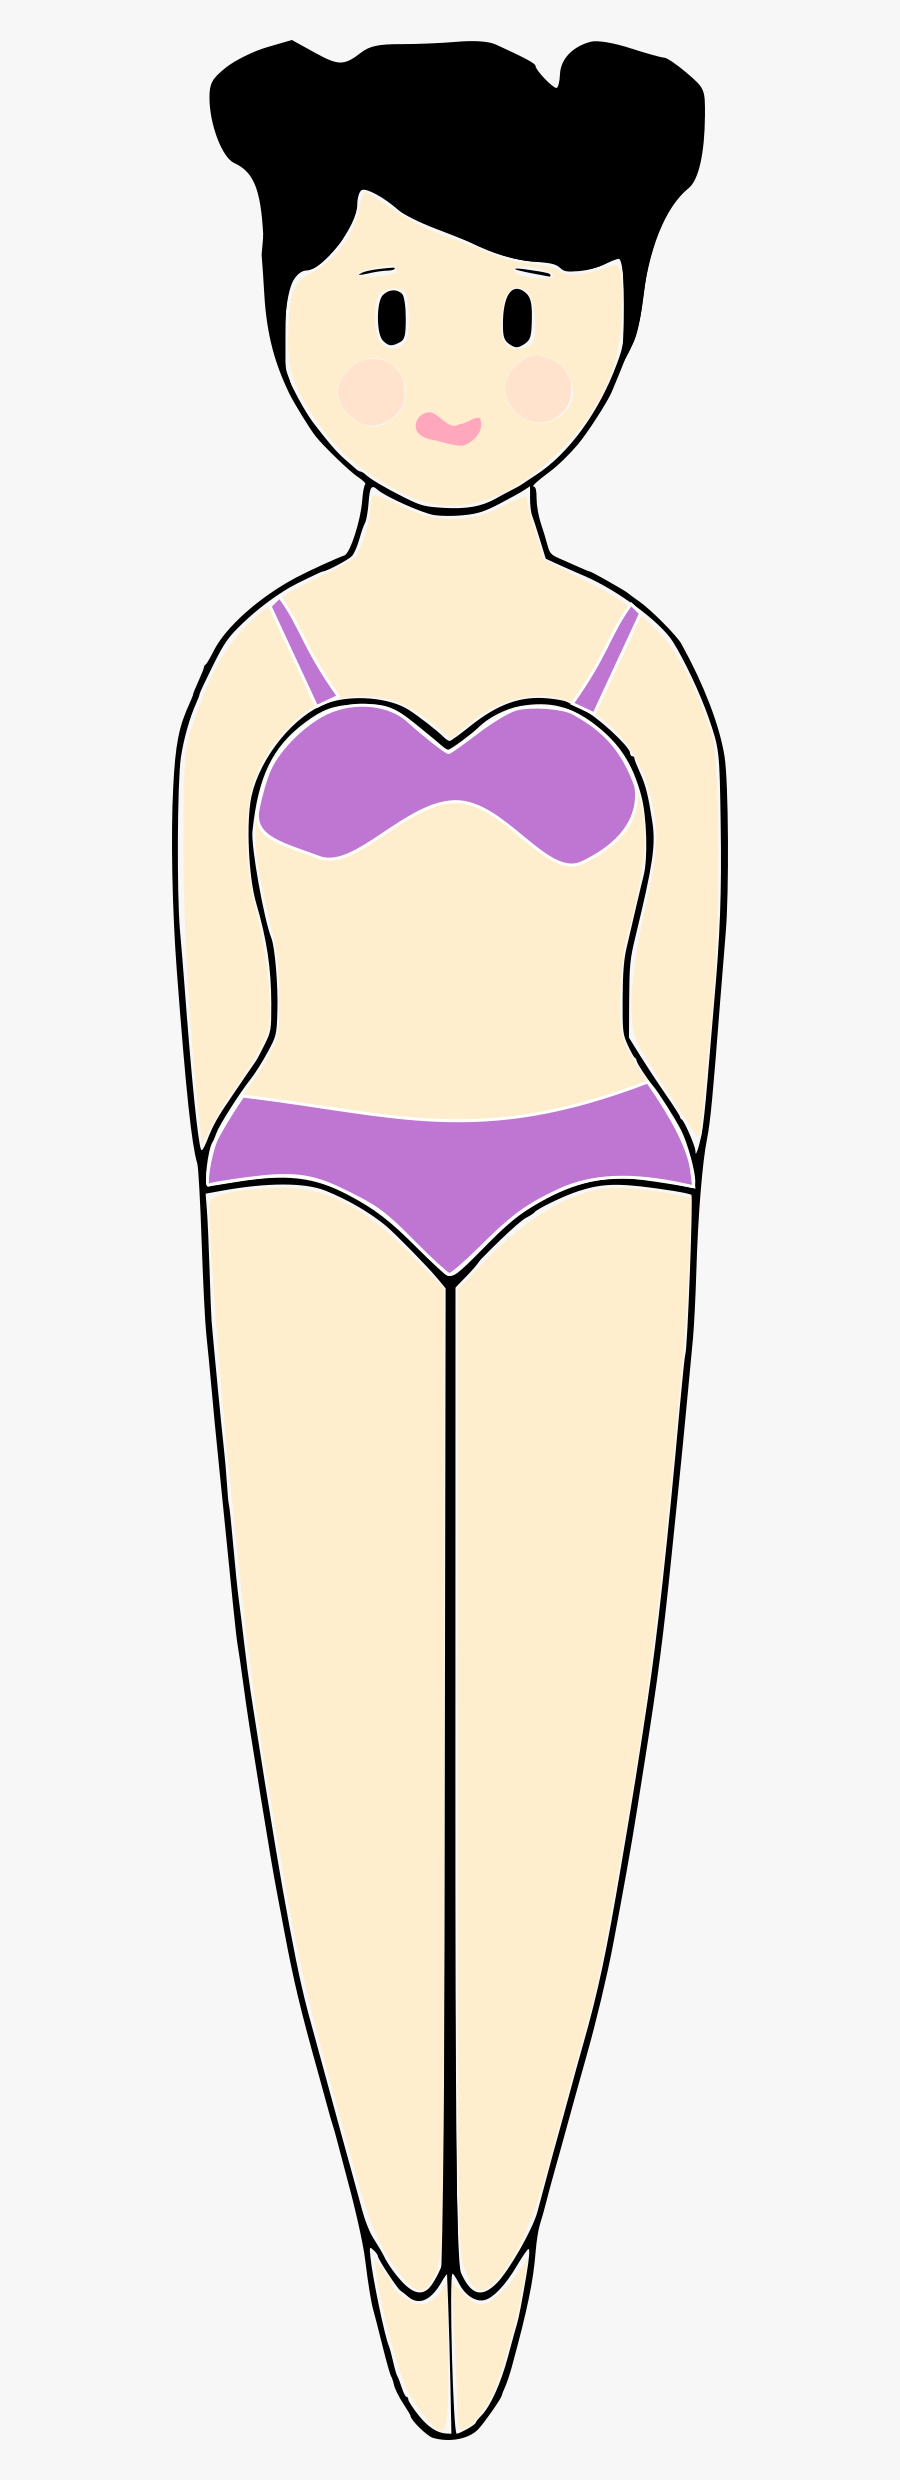 Clipart Child Swimsuit - Girl In Swimsuit Clipart, Transparent Clipart